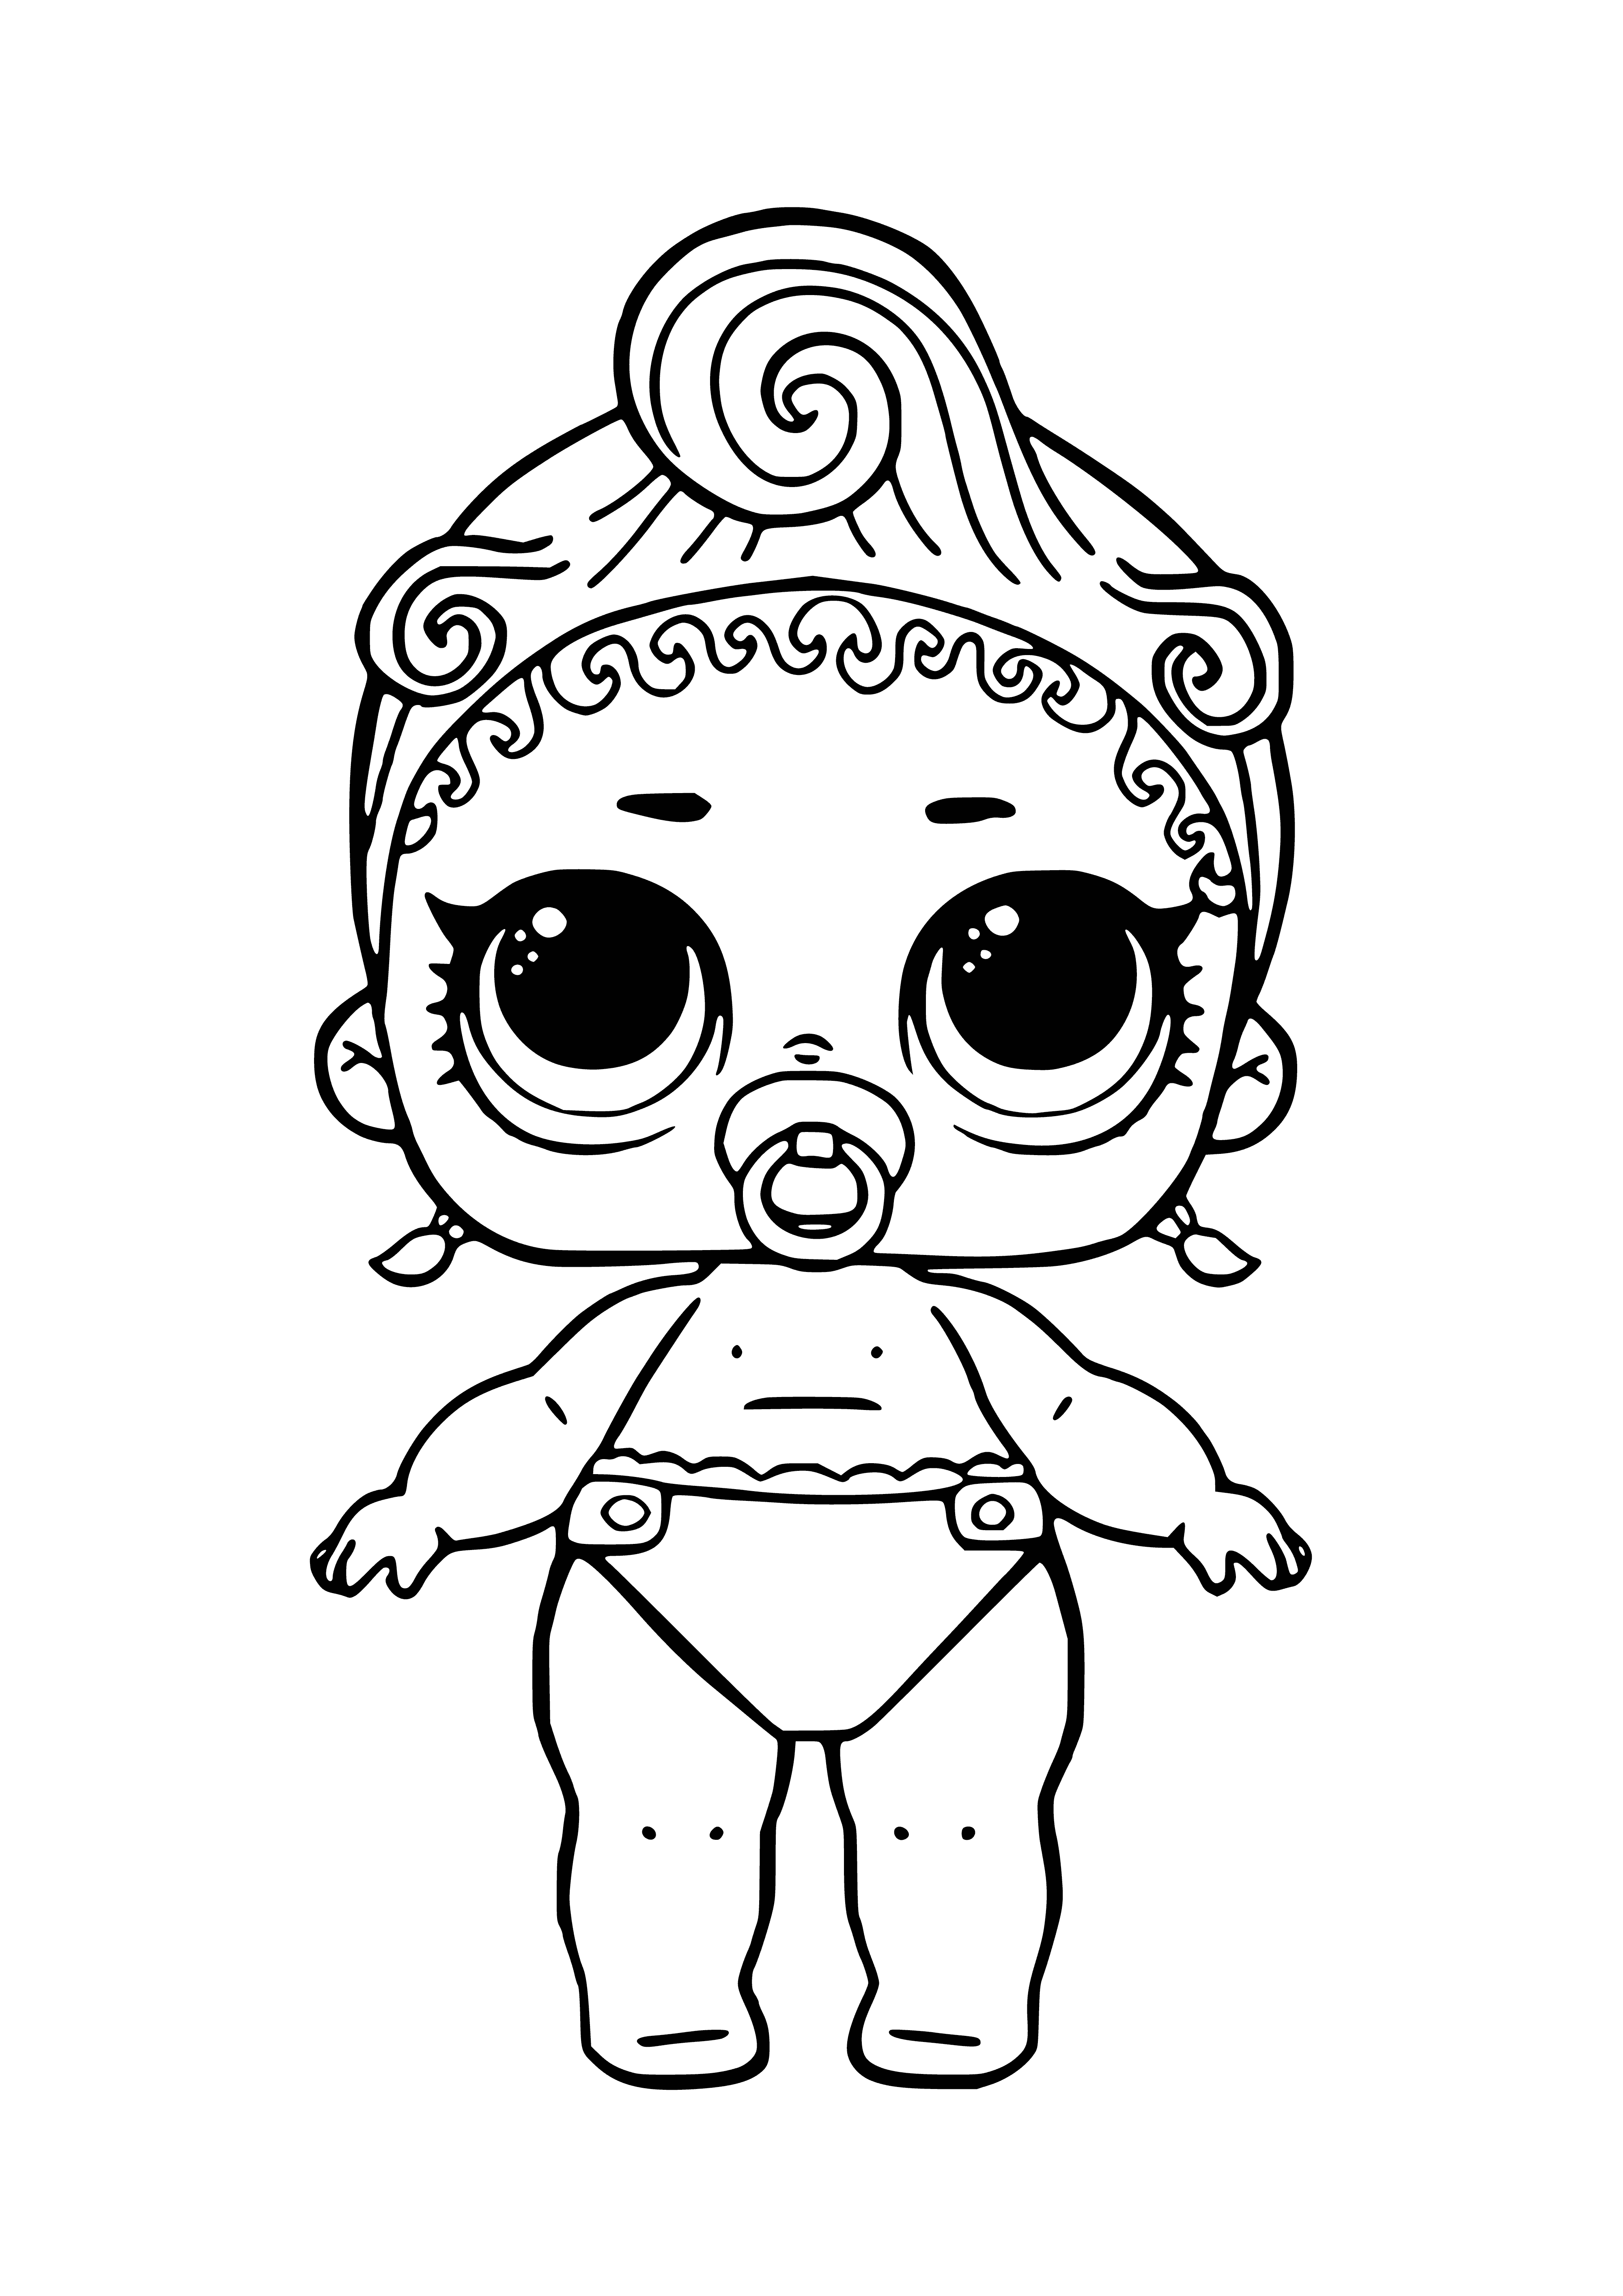 coloring page: Happy baby coloring page: a pink kid laughing and enjoying life! #babycoloring